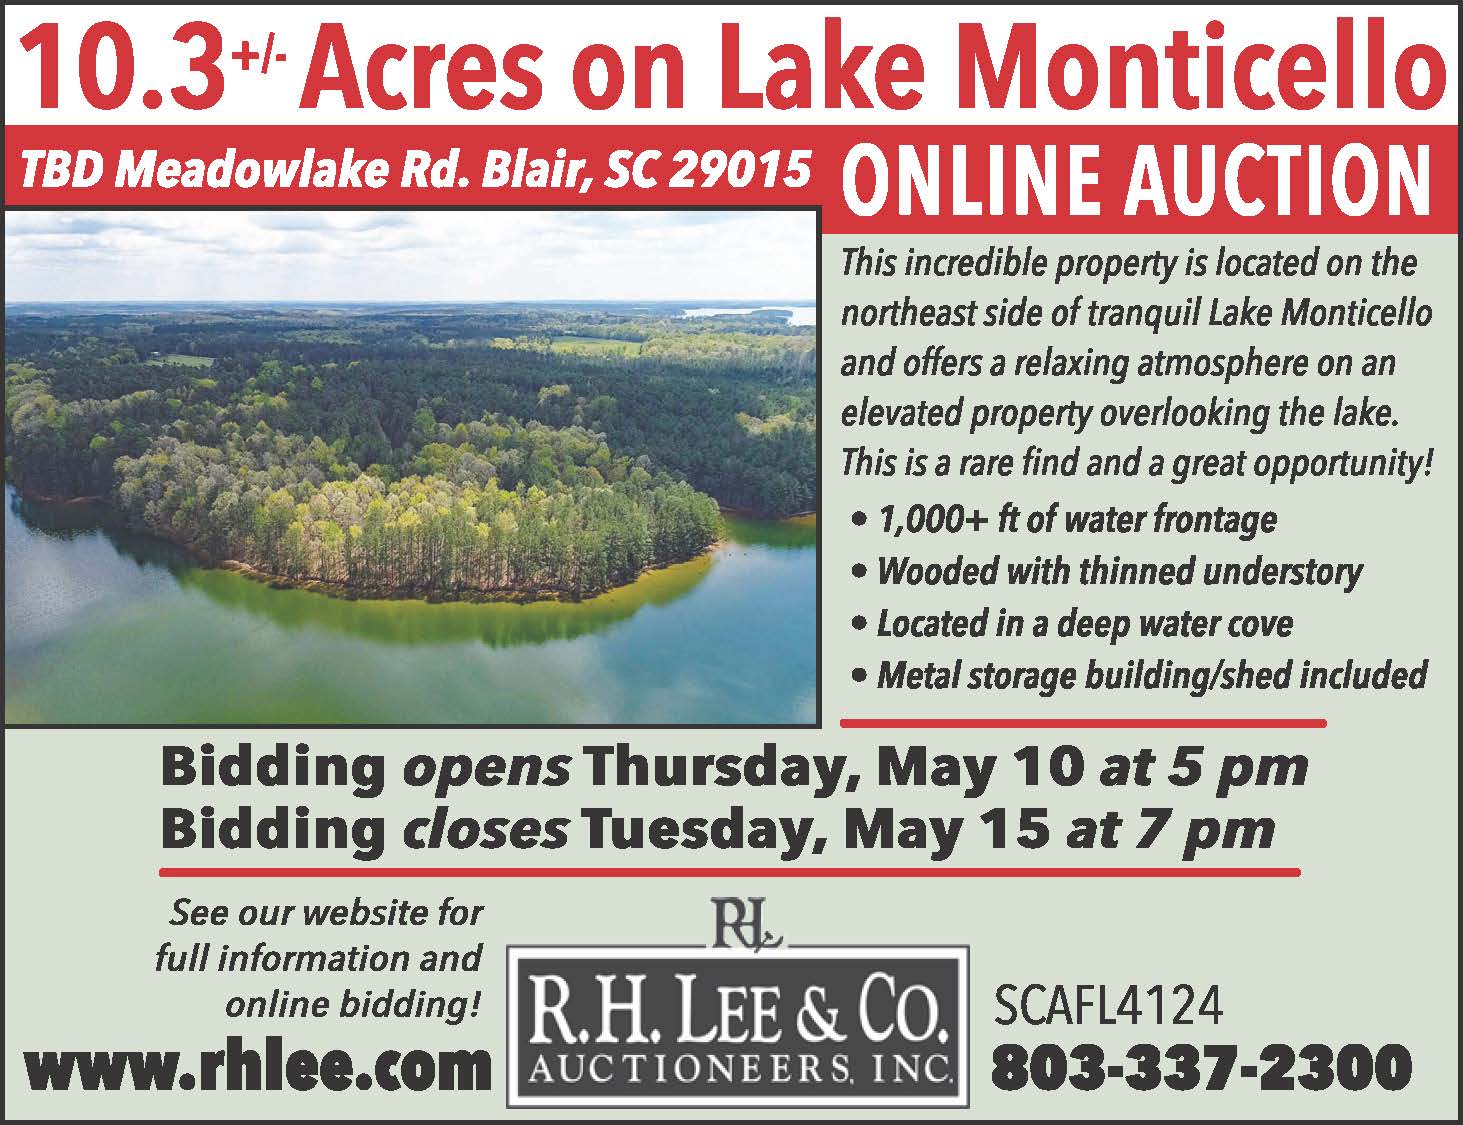 Online Property Auction - Lake Monticello: +/- Acres | The Voice of  Blythewood & Fairfield County